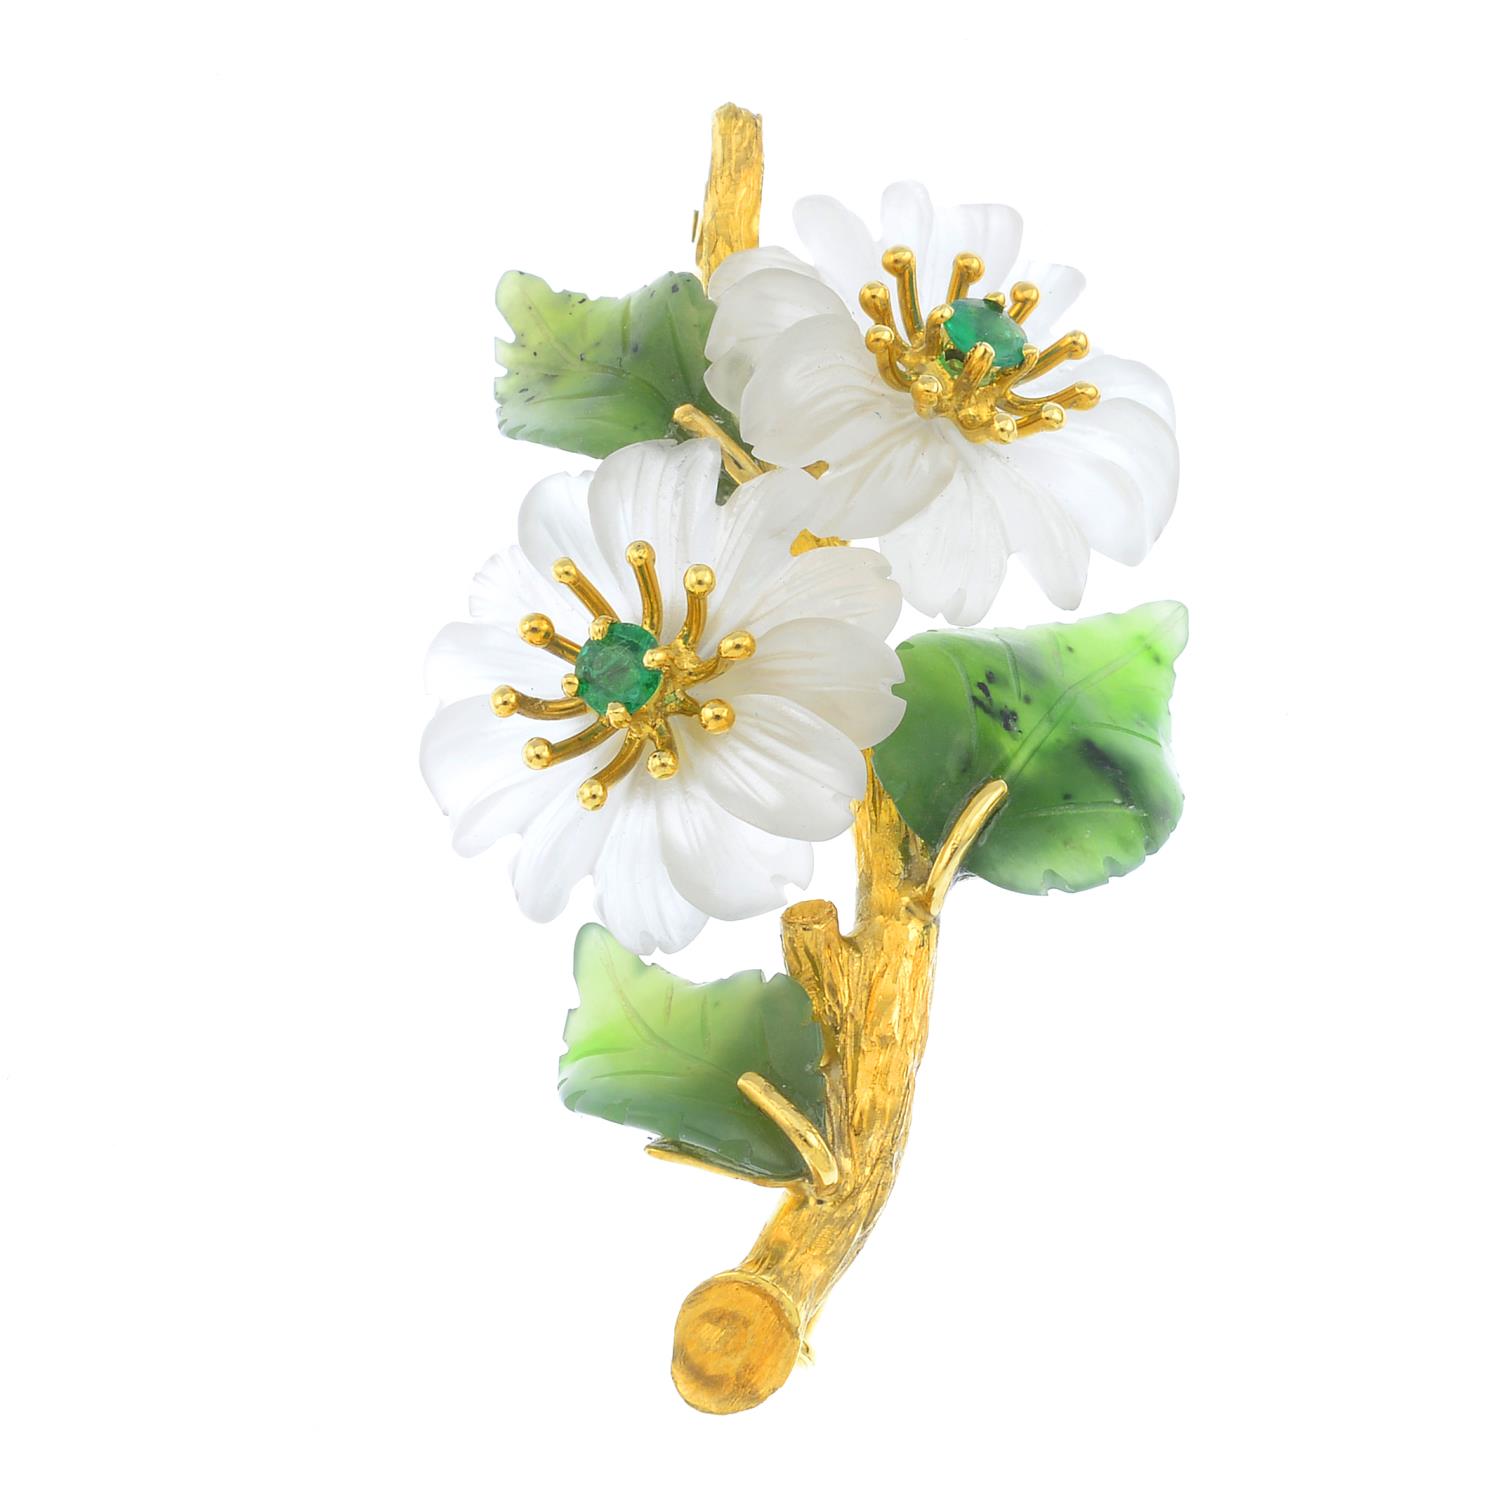 An emerald, chalcedony and nephrite jade floral brooch. The circular-shape emerald and chalcedony